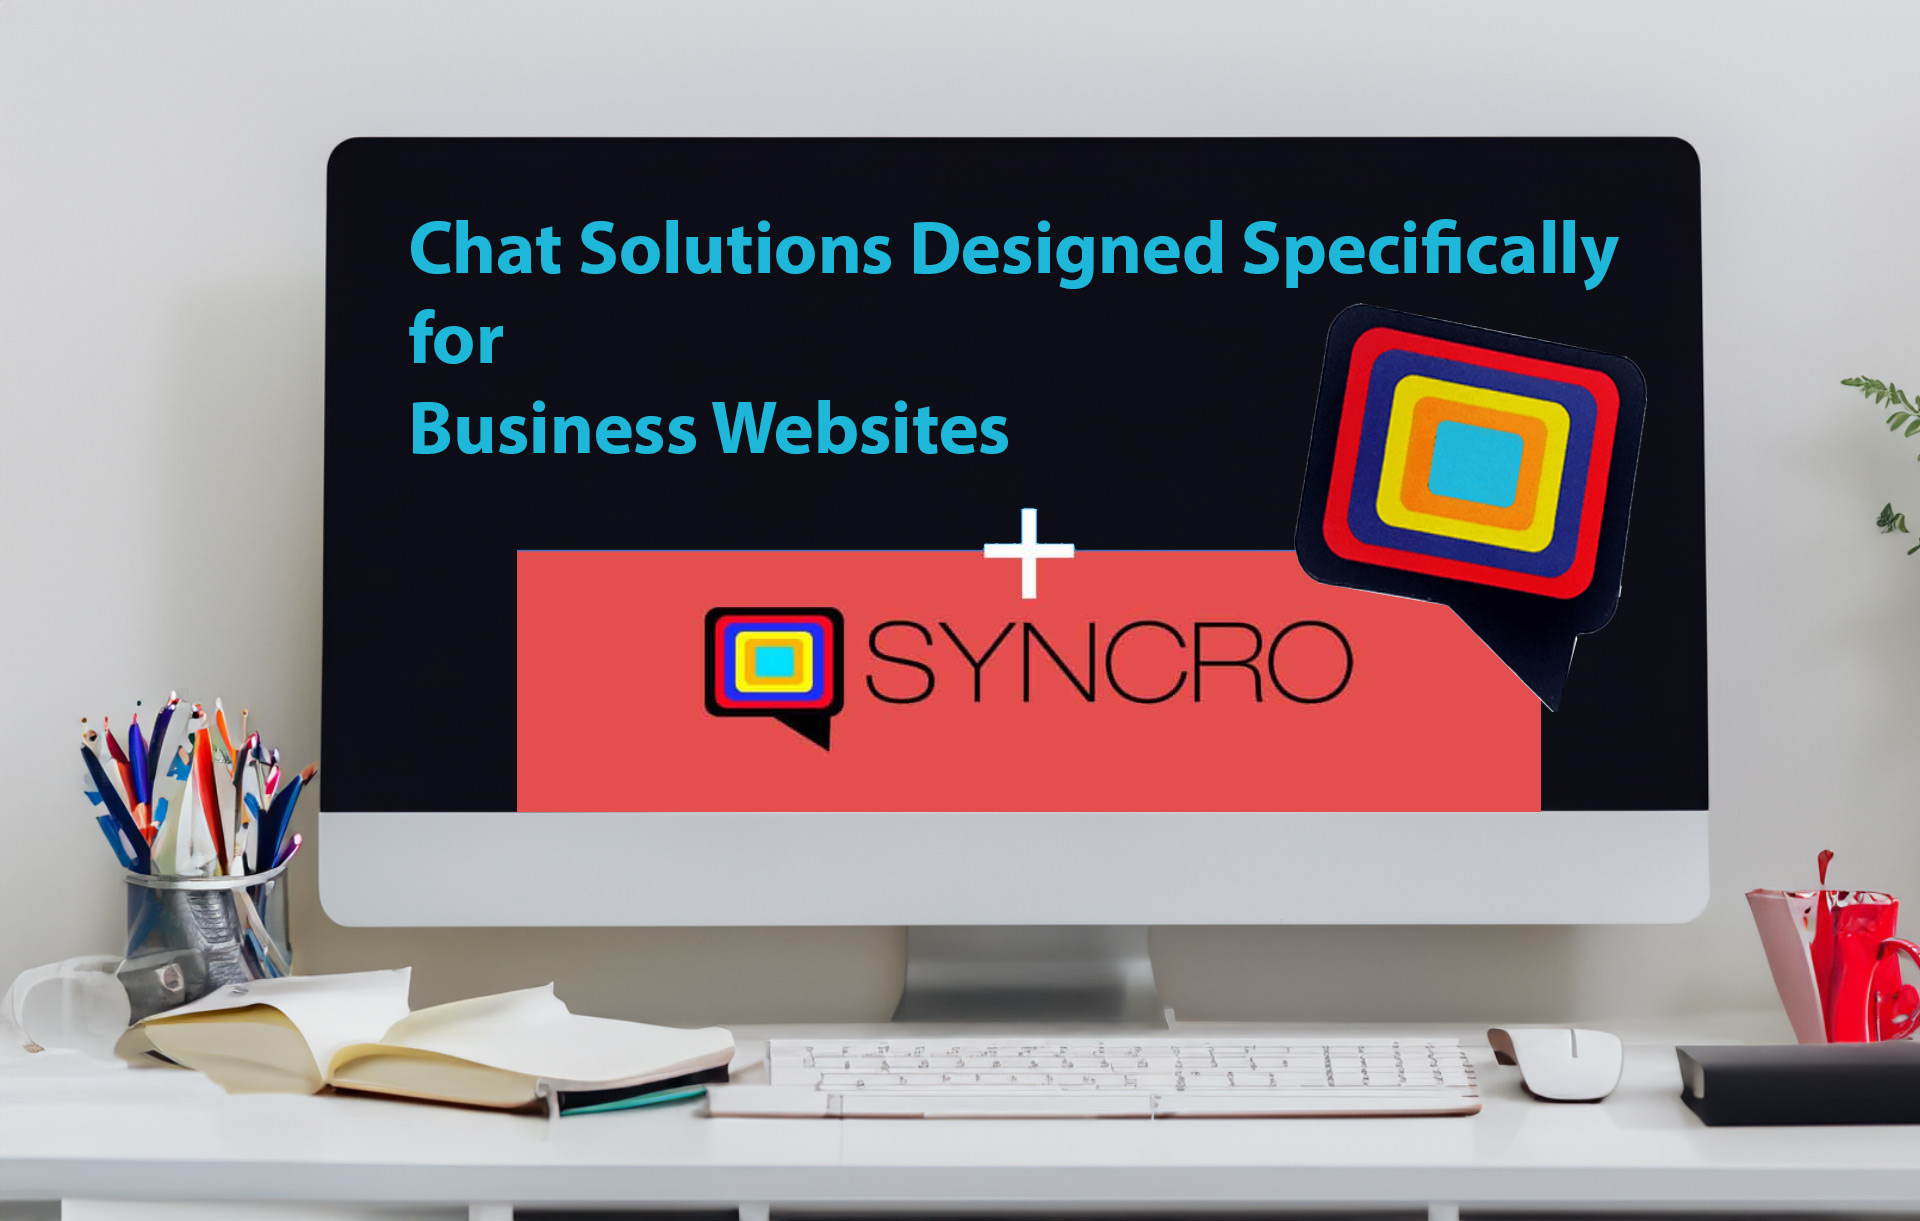 What Types of Businesses Do Chat Solutions For Websites Benefit?